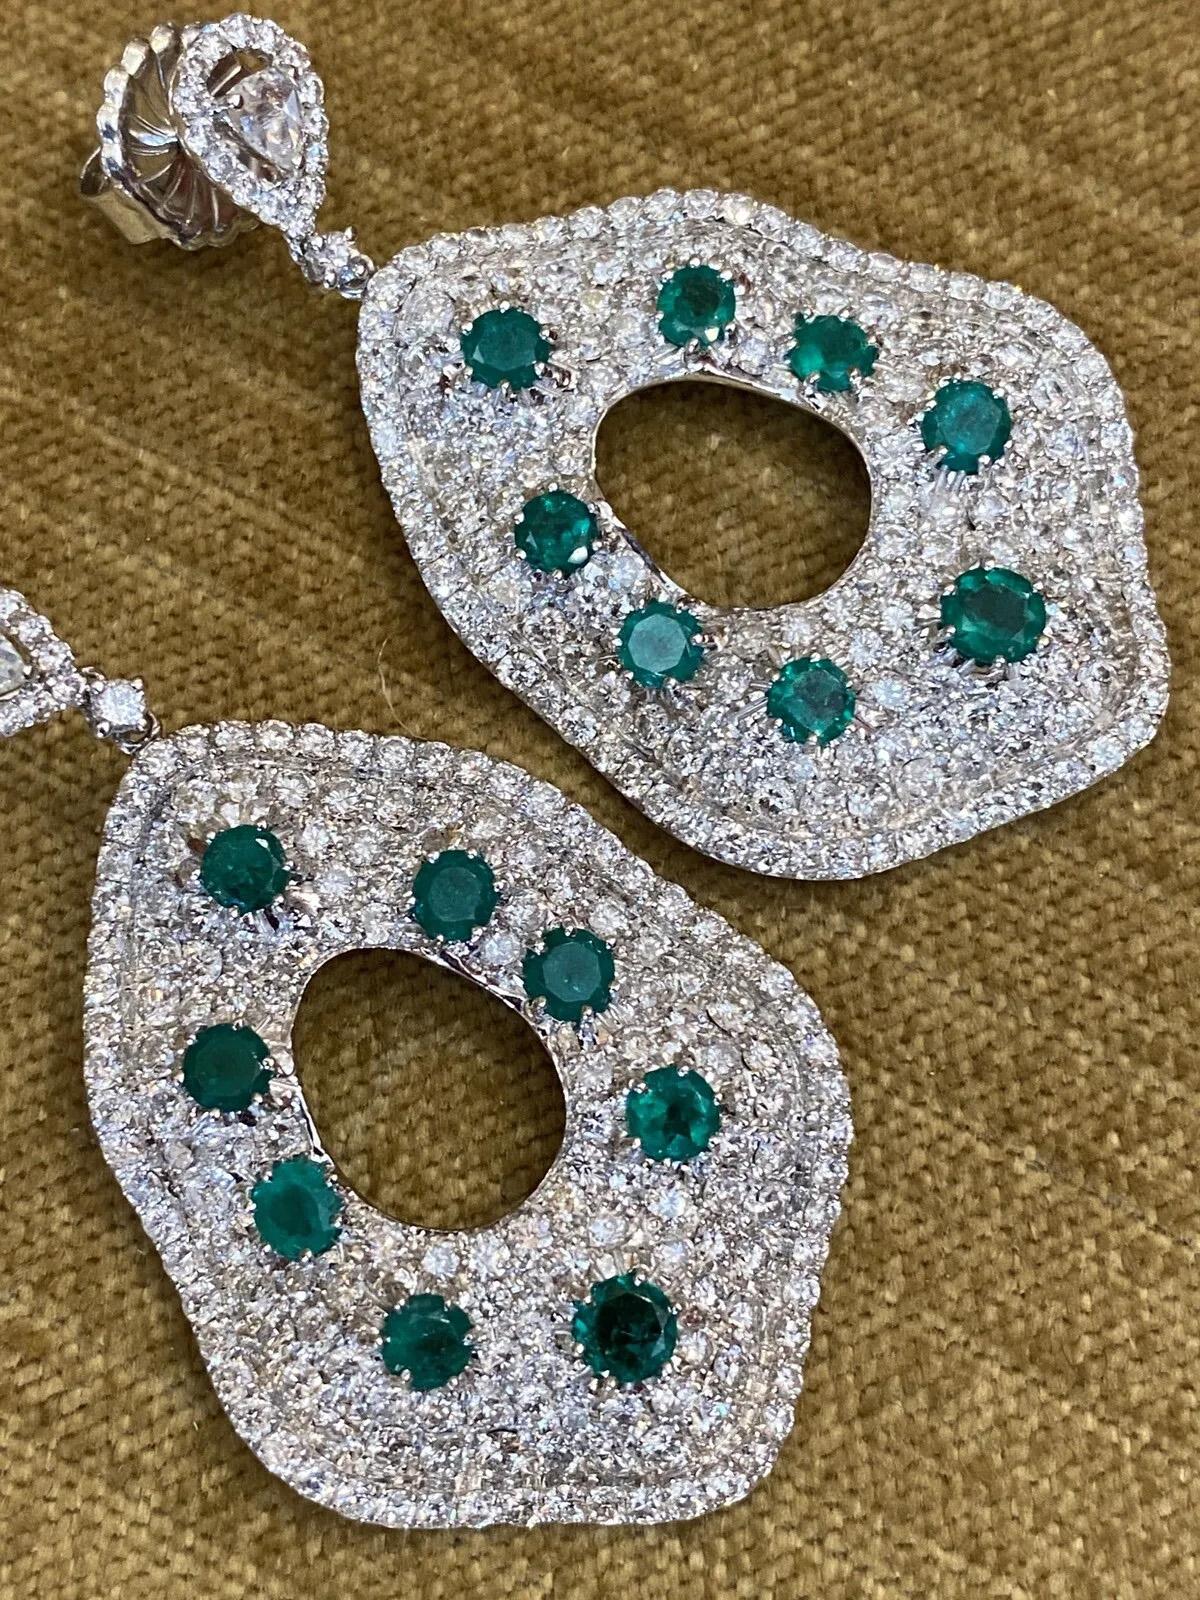 Pavé Diamond and Emerald Drop Earrings in 18k White Gold

Elegant Pavé Diamond and Emerald Drop Earrings feature Round cut Emeralds, Triangle Rose cut Diamonds, and Round Brilliant cut Diamonds Pavé set in 18k White Gold. All diamonds are lively and